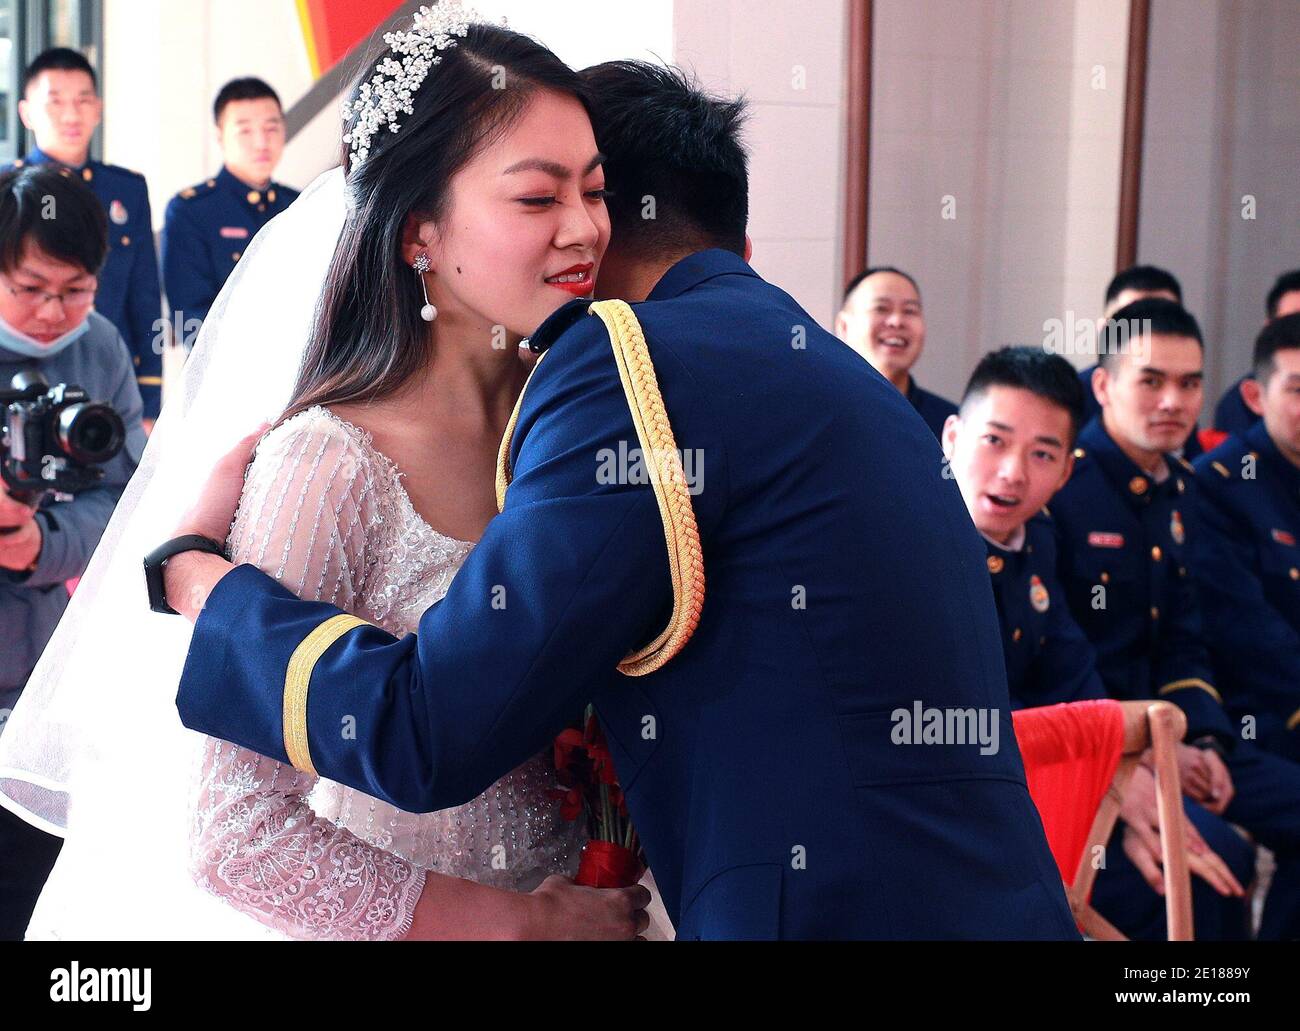 Shanghai. 4th Jan, 2021. Firefighter Yuan Yang hugs his bride Xu Lu during a group wedding ceremony in east China's Shanghai, Jan. 4, 2021. A fire brigade in Shanghai's Changning District on Monday held a group wedding for four firefighter couples, whose weddings were postponed as a result of their service in the fight against COVID-19. Credit: Chen Fei/Xinhua/Alamy Live News Stock Photo